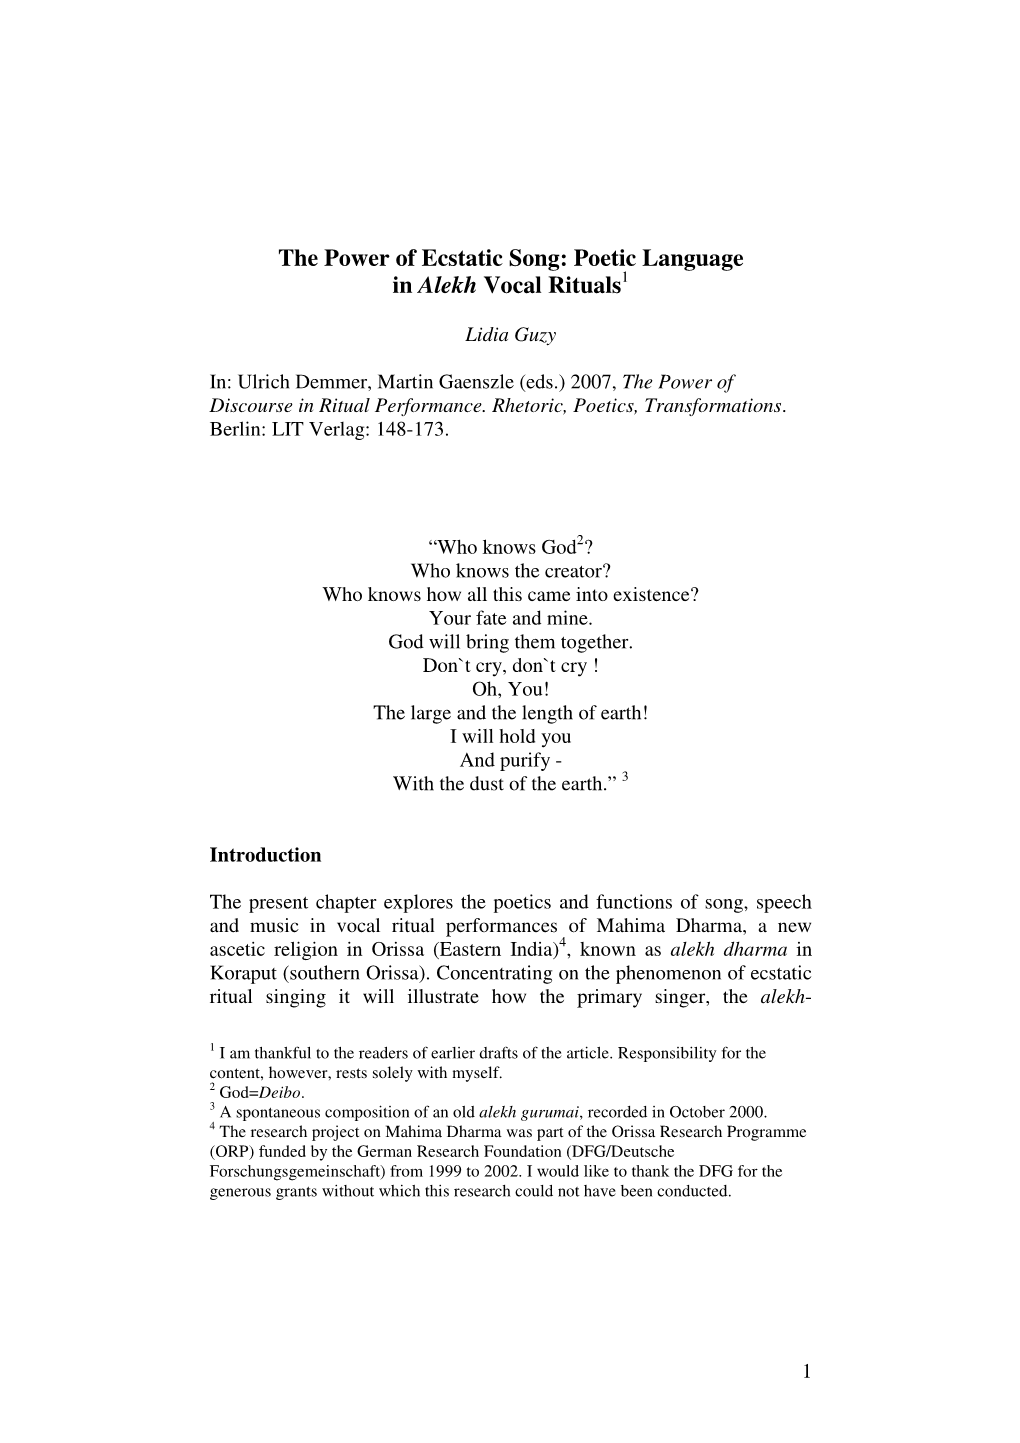 The Power of Ecstatic Song: Poetic Language in Alekh Vocal Rituals 1